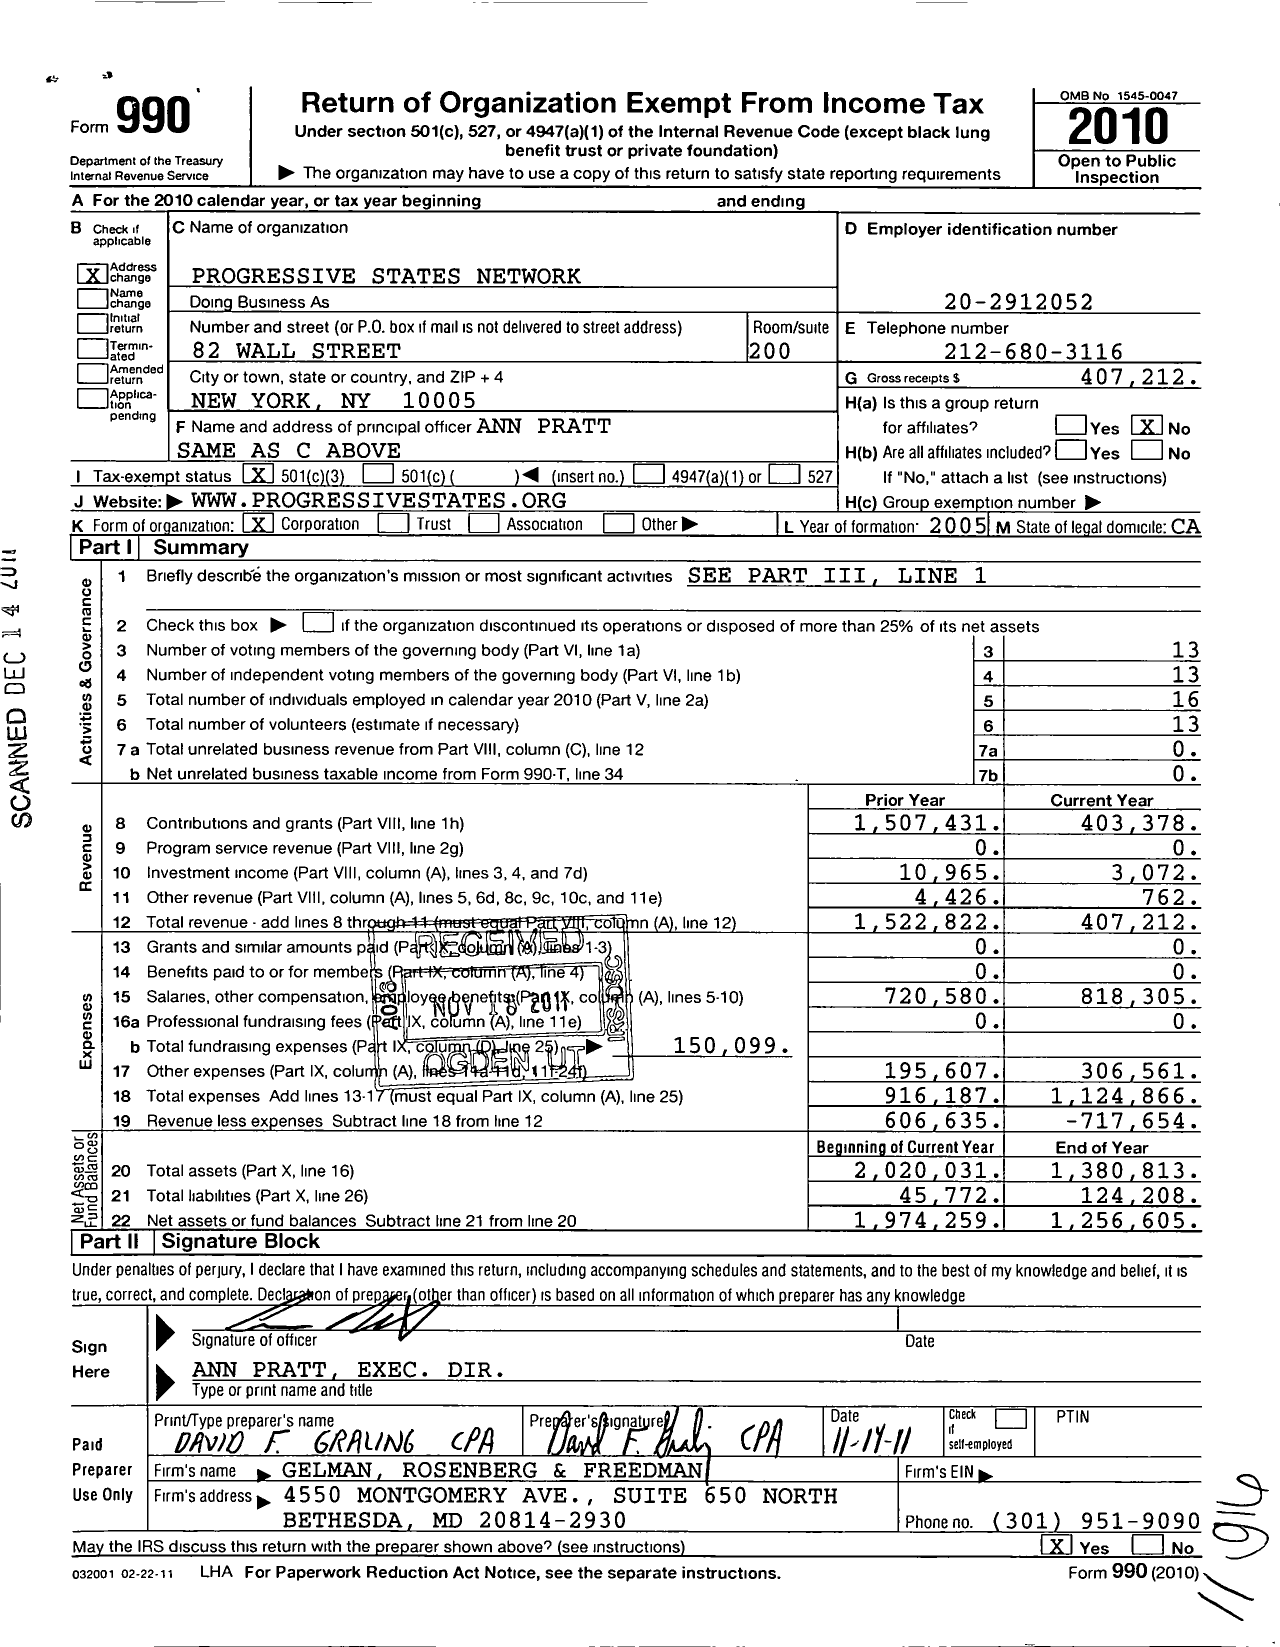 Image of first page of 2010 Form 990 for Progressive States Network